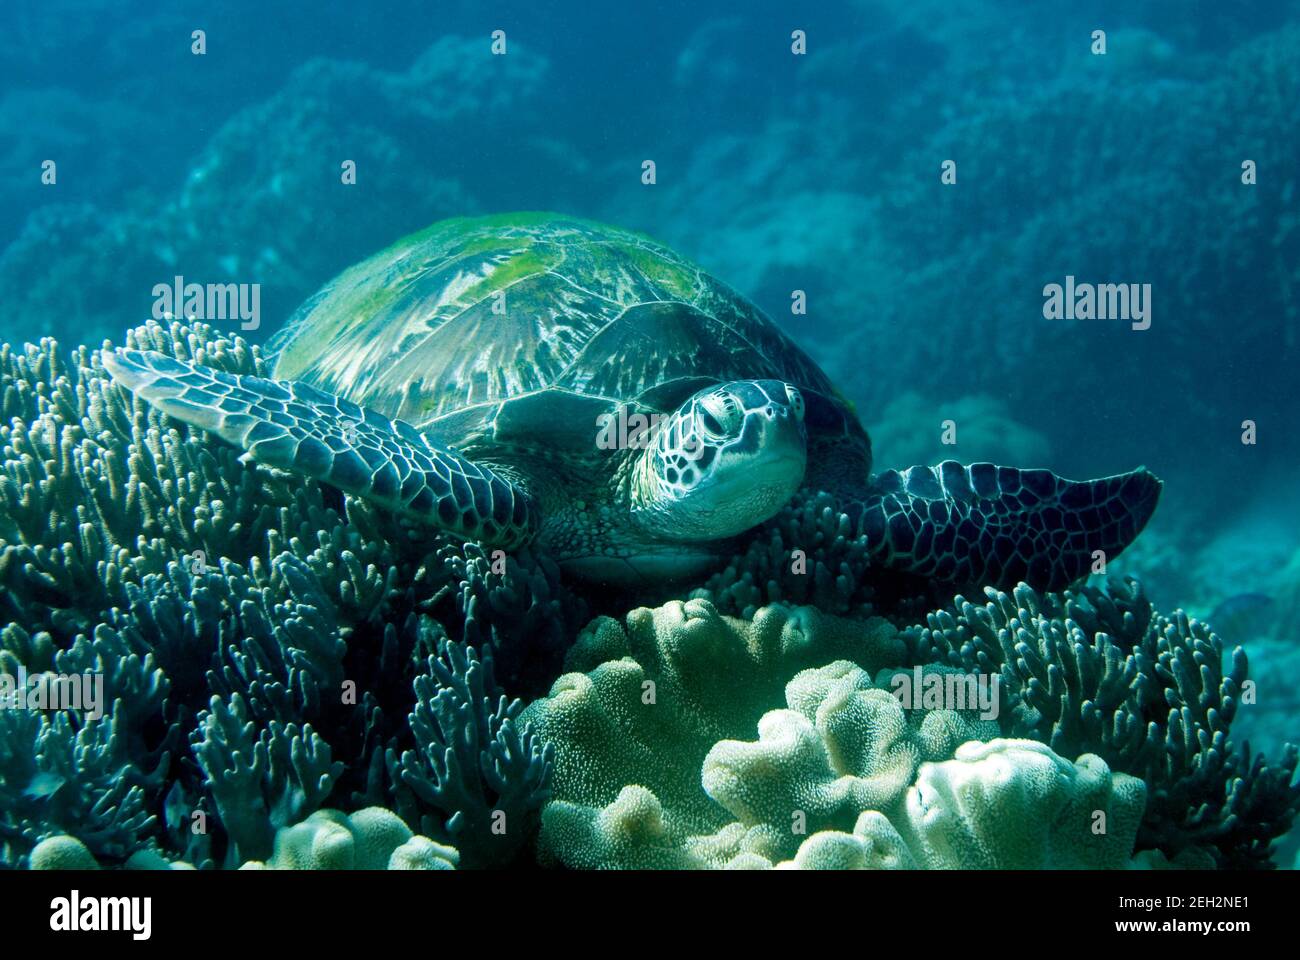 Green Sea Turtle resting on a coral. Underwater image taken scuba diving in Philippines. Philippines Stock Photo